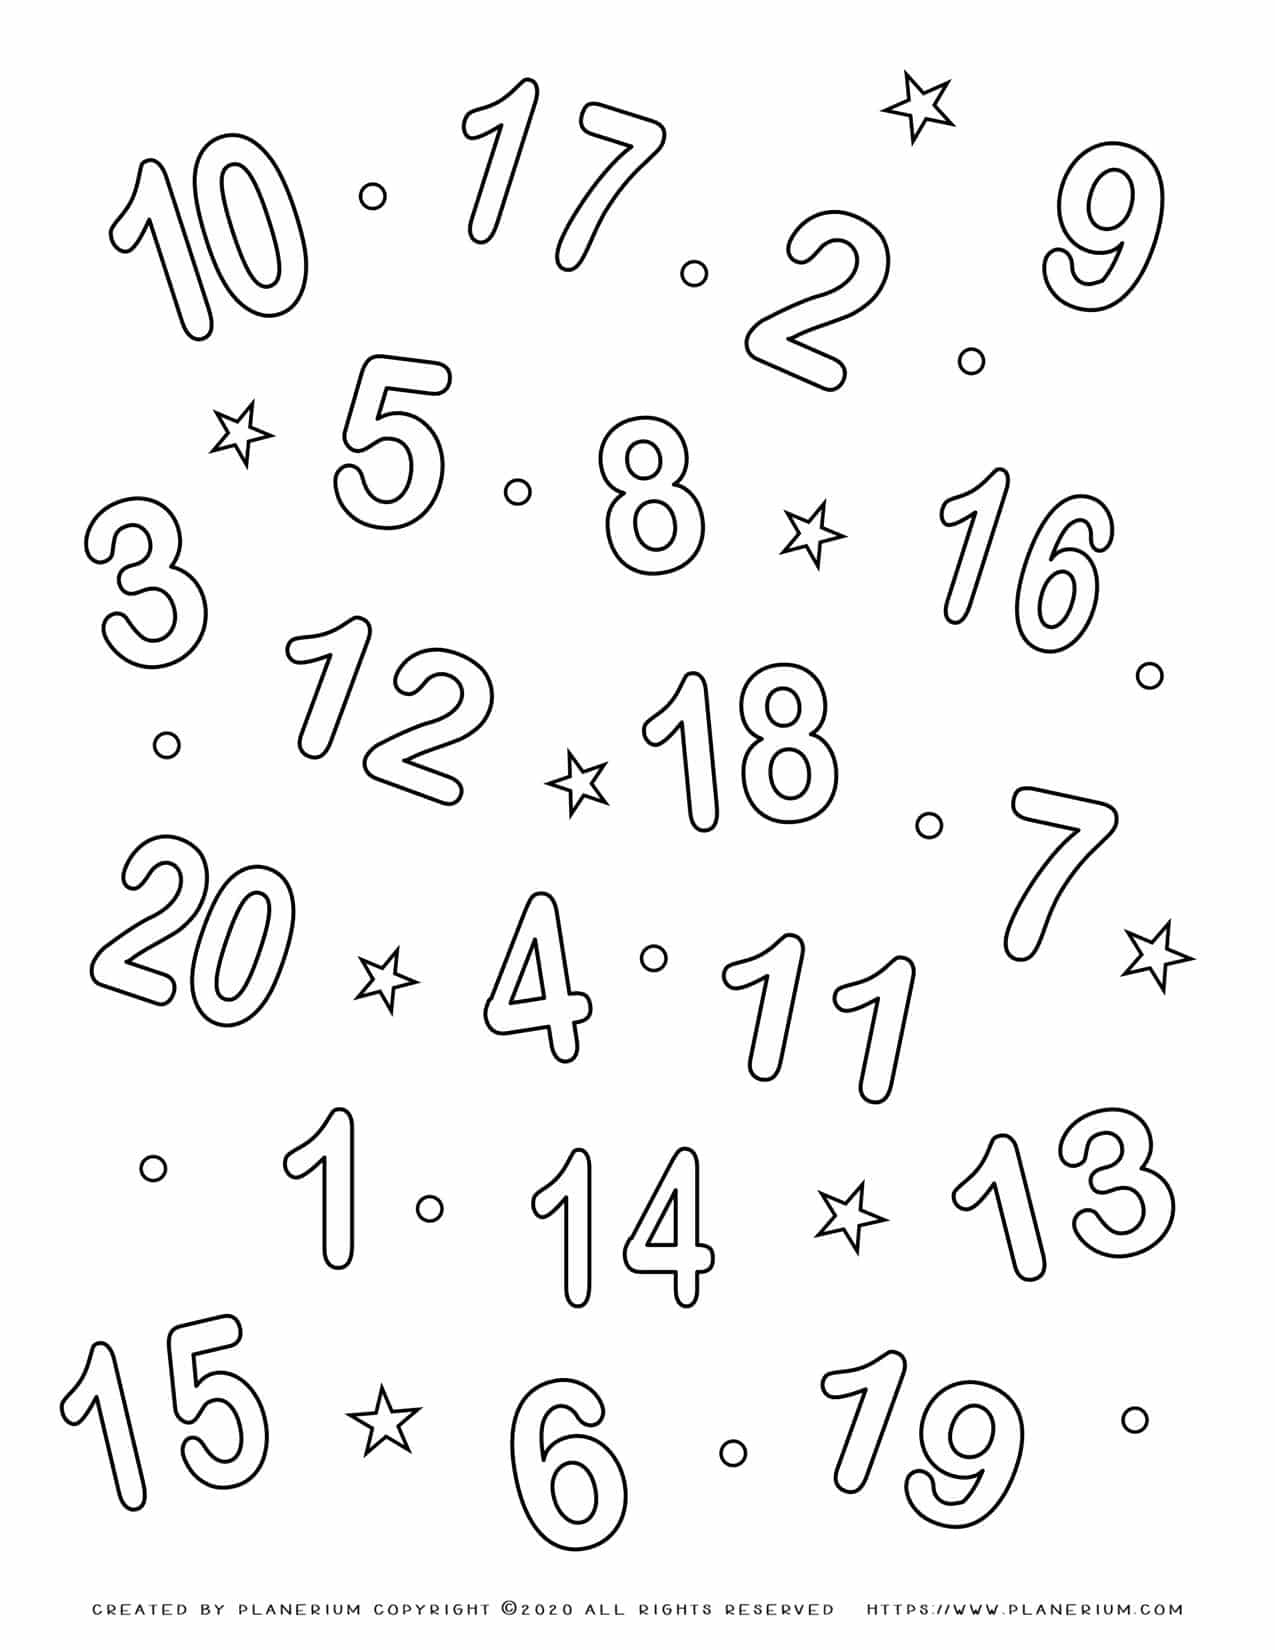 Number Coloring Pages   20 to 20   Free Printables   Planerium